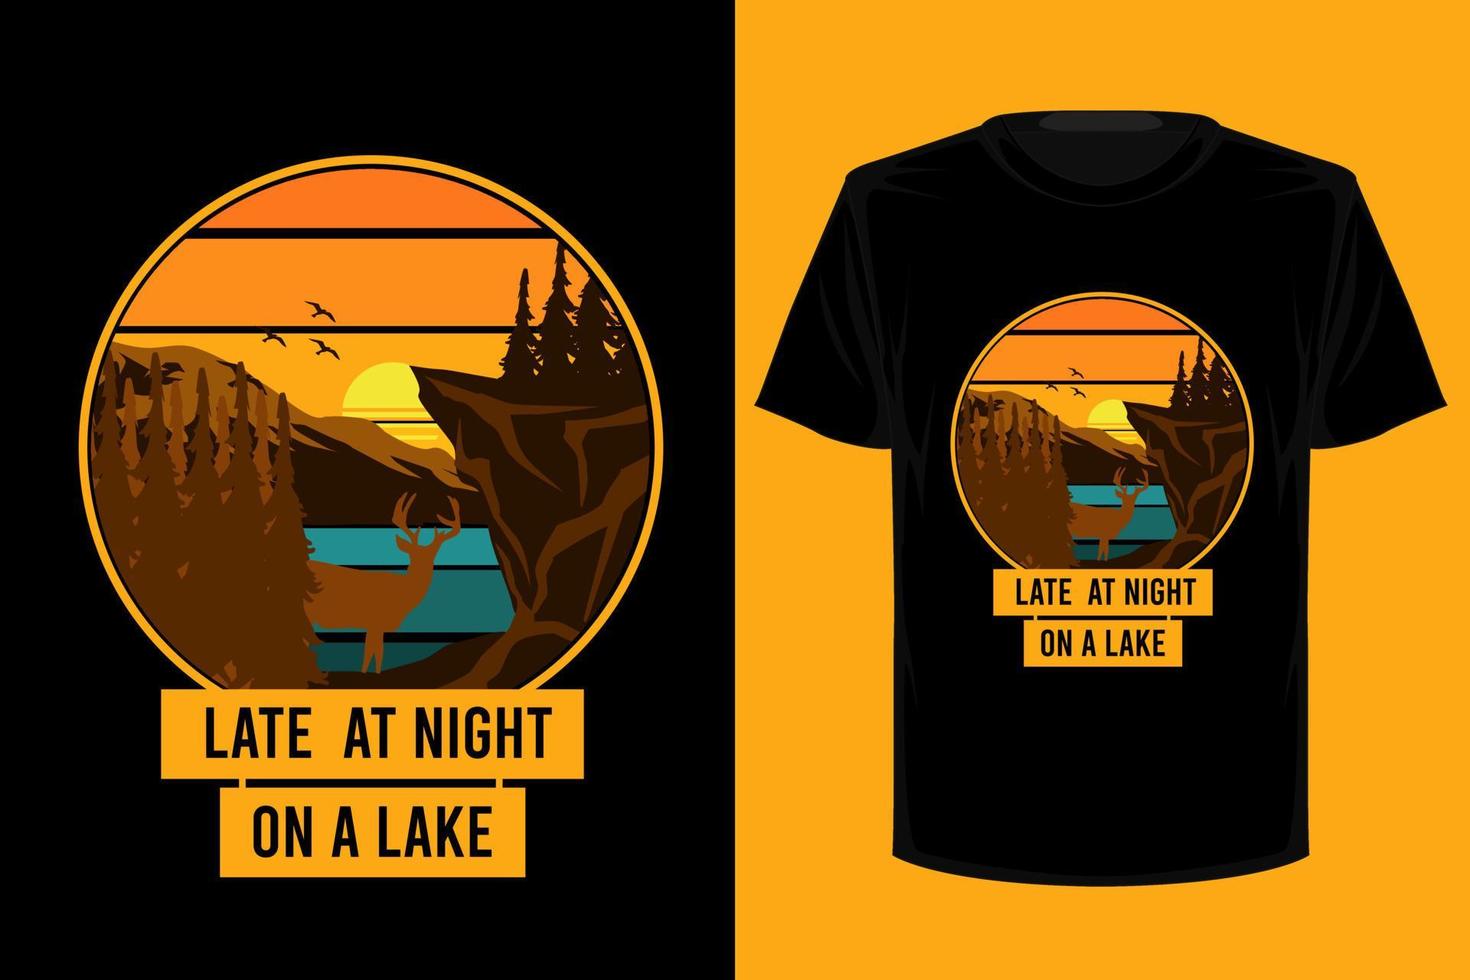 Late at night on a lake retro vintage t shirt design vector